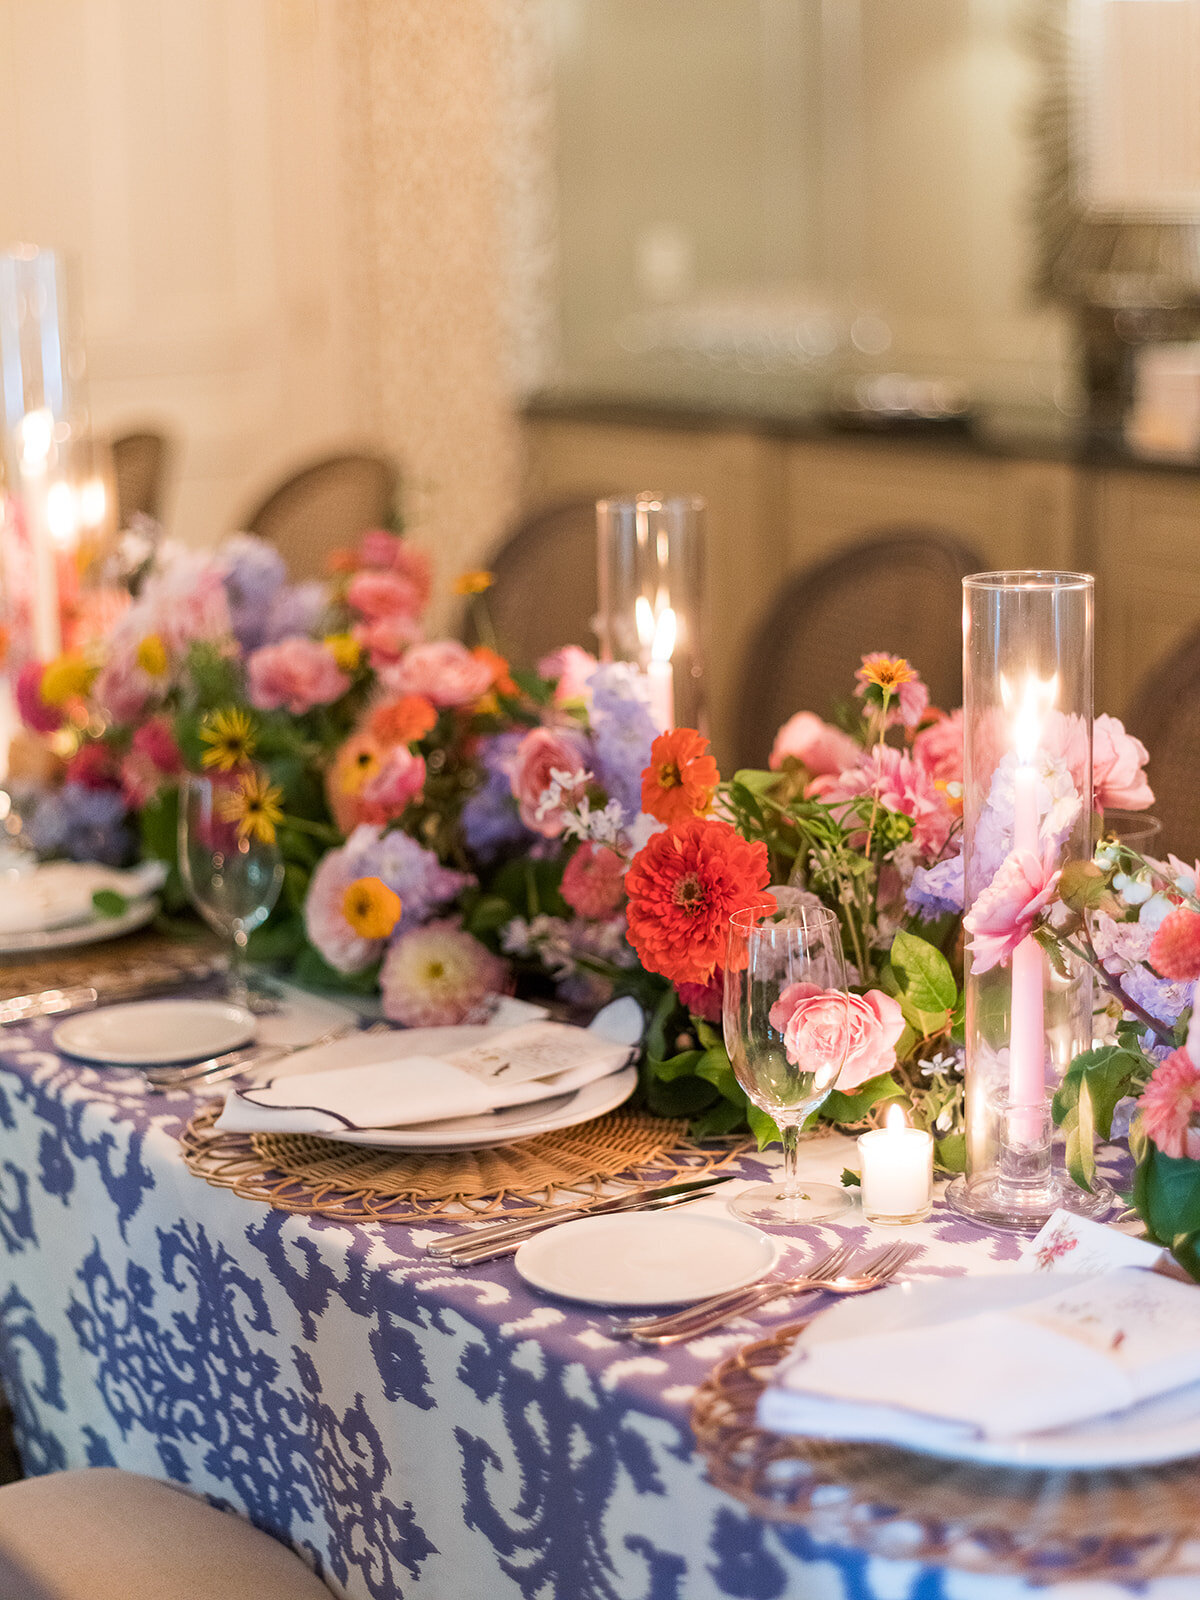 Kate-Murtaugh-Events-RI-wedding-planner-micro-wedding-Inn-at-Hastings-Park-boutique-hotel-Lexington-Boston-MA-luxury-elopement-colorful-dahlia-florals-candlelight-dinner-table